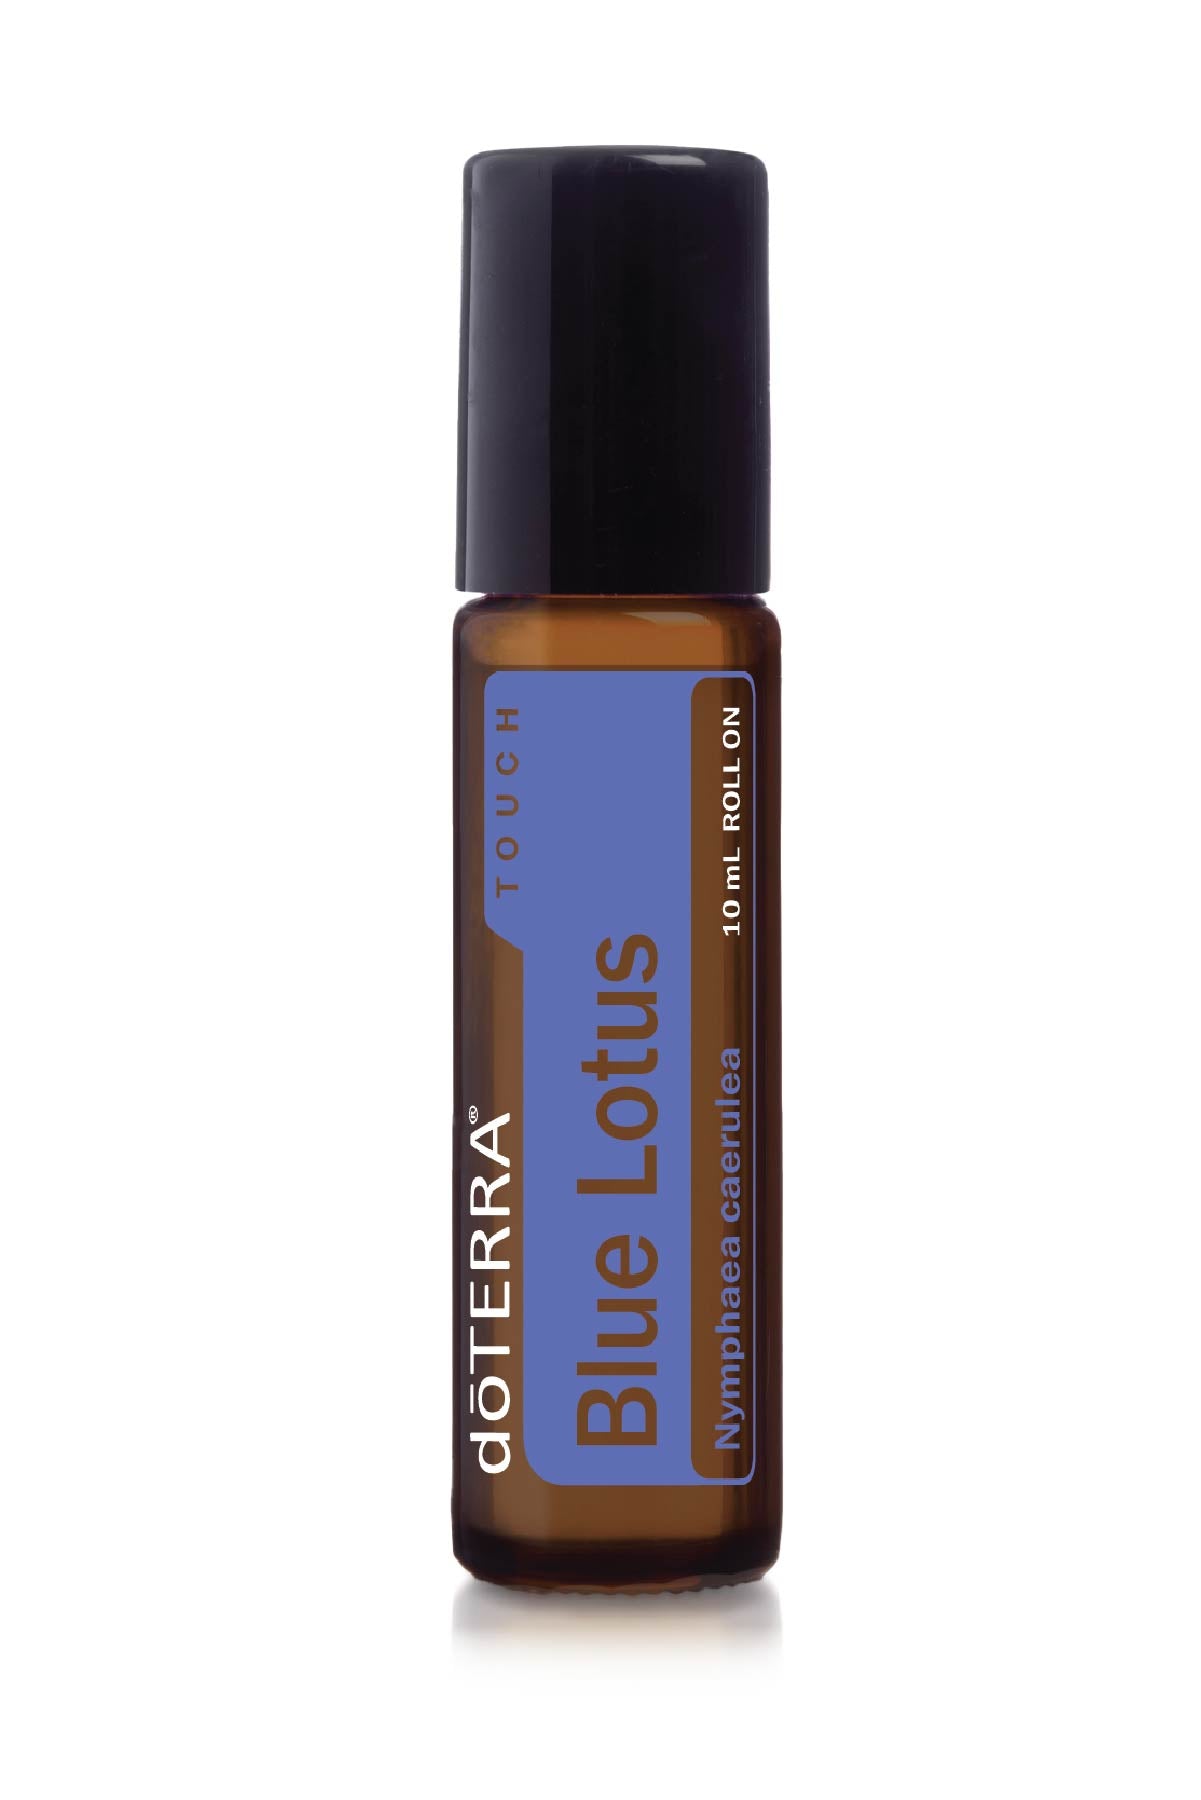 Blue Lotus Touch by doTERRA - 10ml Roll On - LIMITED TIME